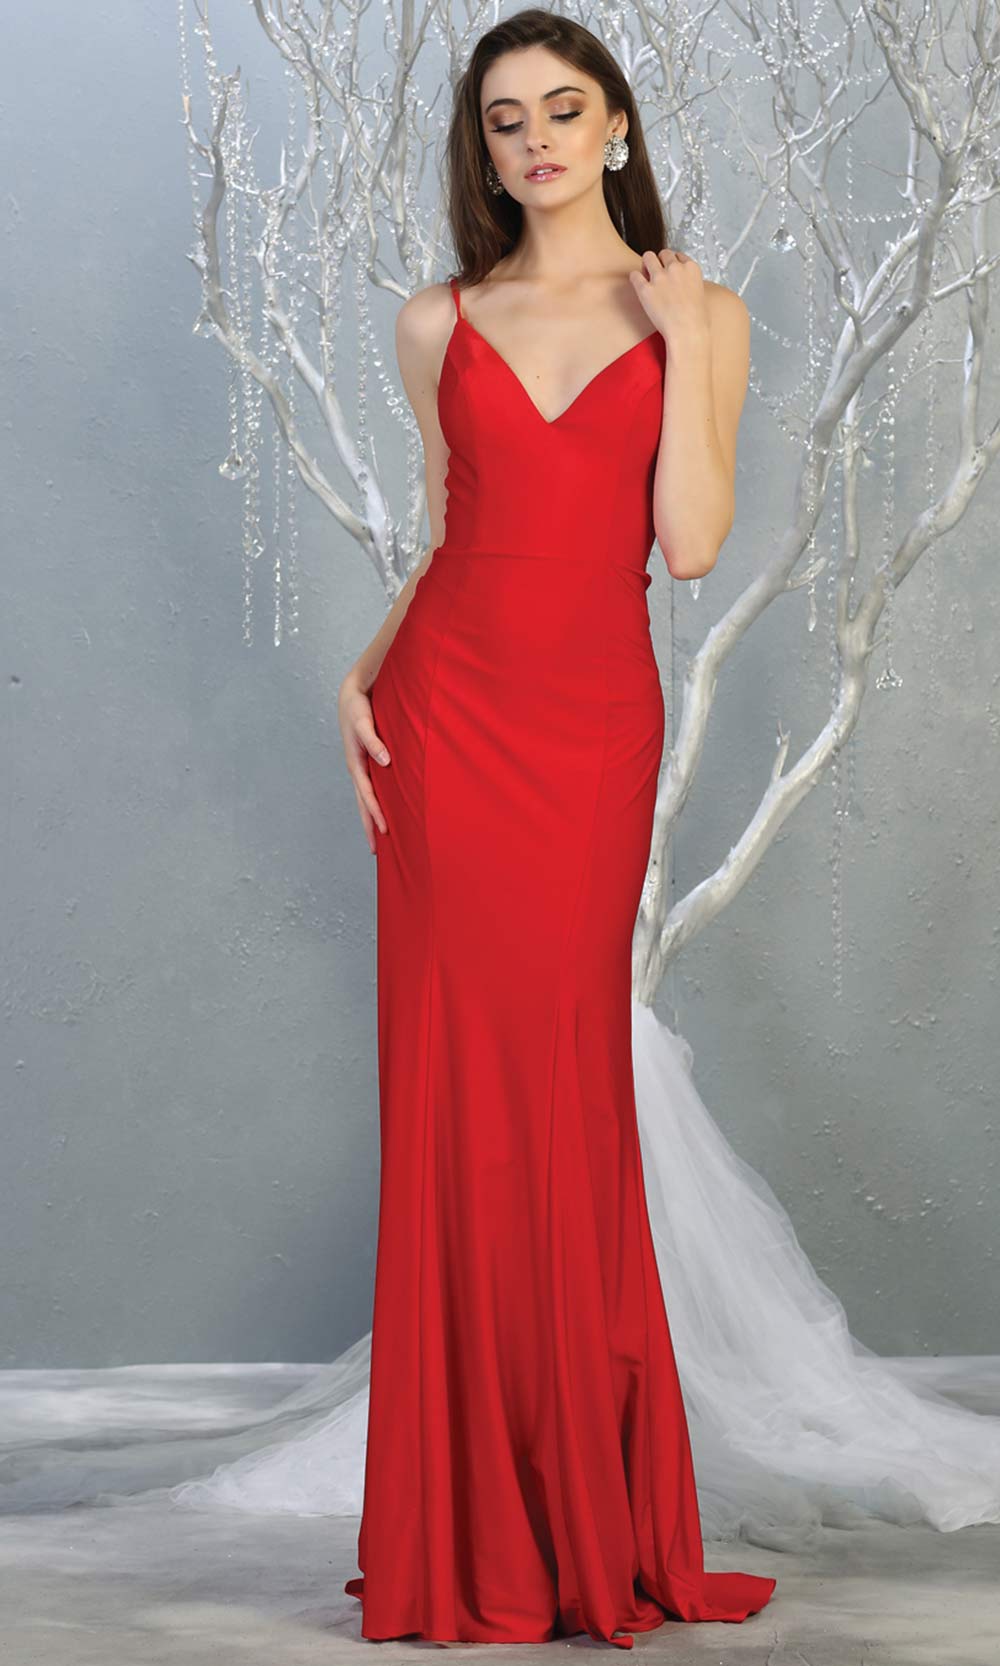 Mayqueen MQ1819 long red sexy fitted prom dress w/open back. Full length red gown is perfect for enagagement/e-shoot dress, wedding reception dress, indowestern gown, formal evening party dress, prom. Plus sizes avail.jpg